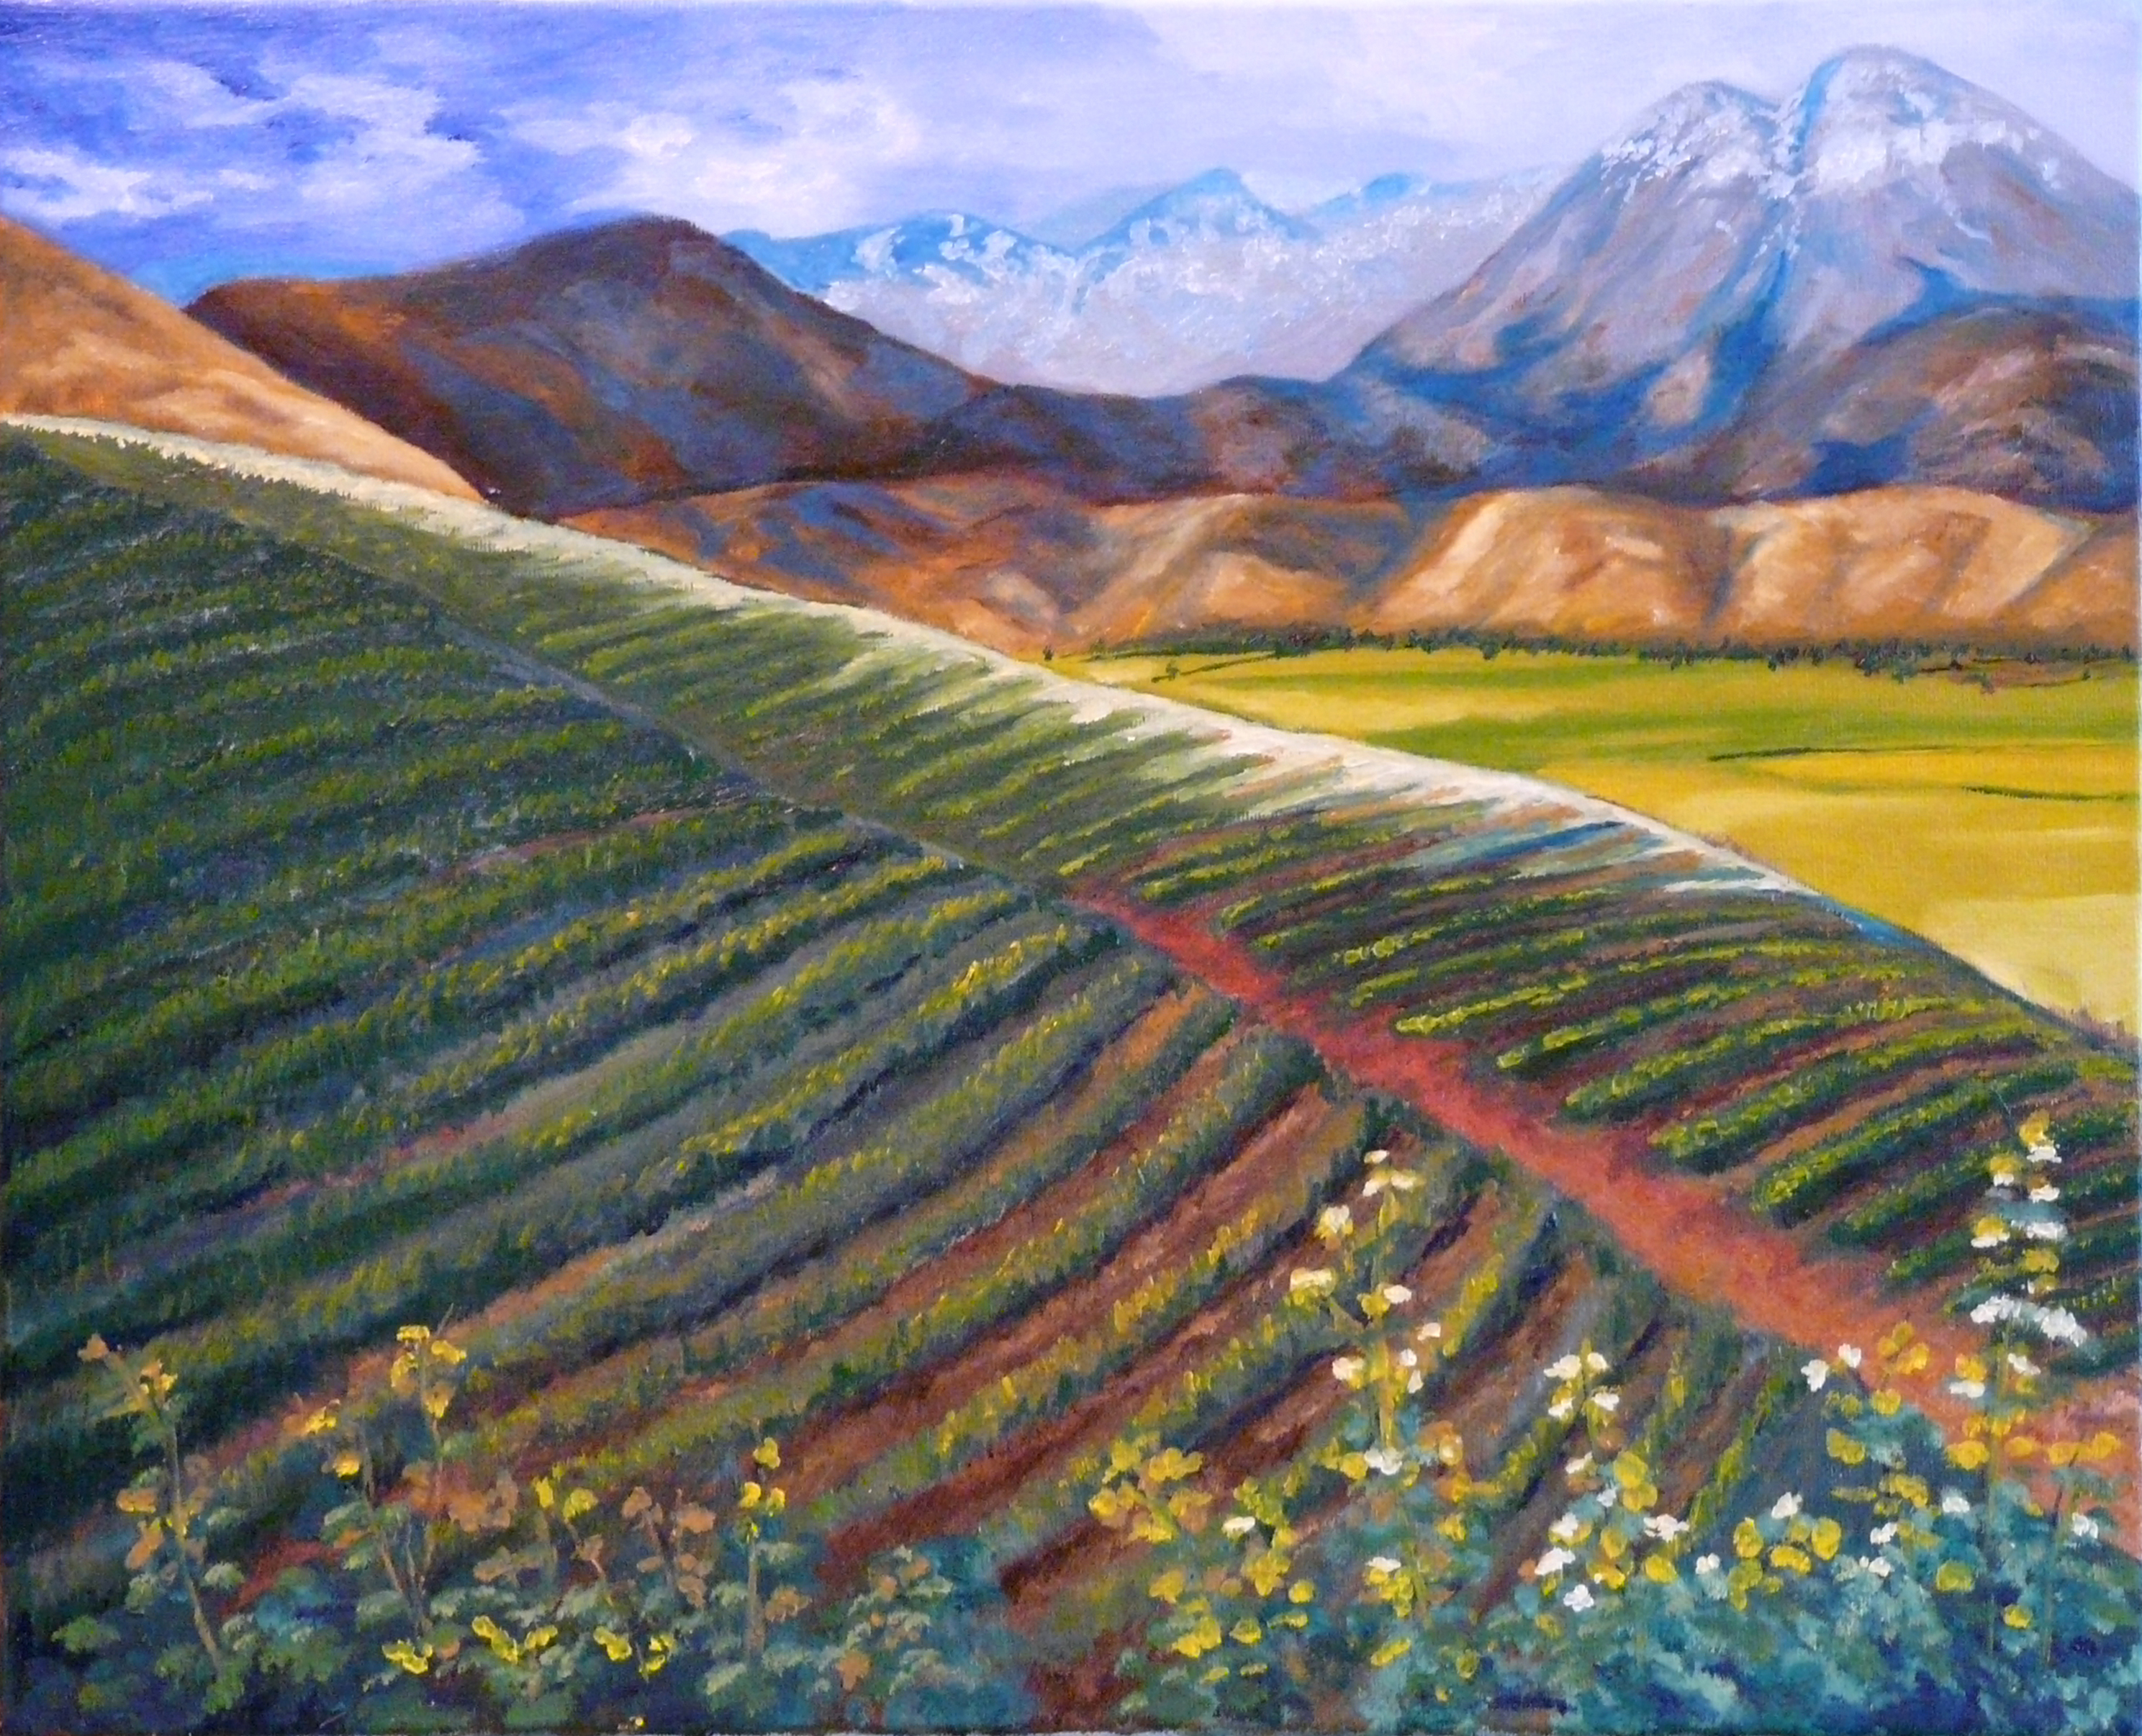 Original Oil Painting by Vic Ritchey, "Mountain Farmland, The vineyard"